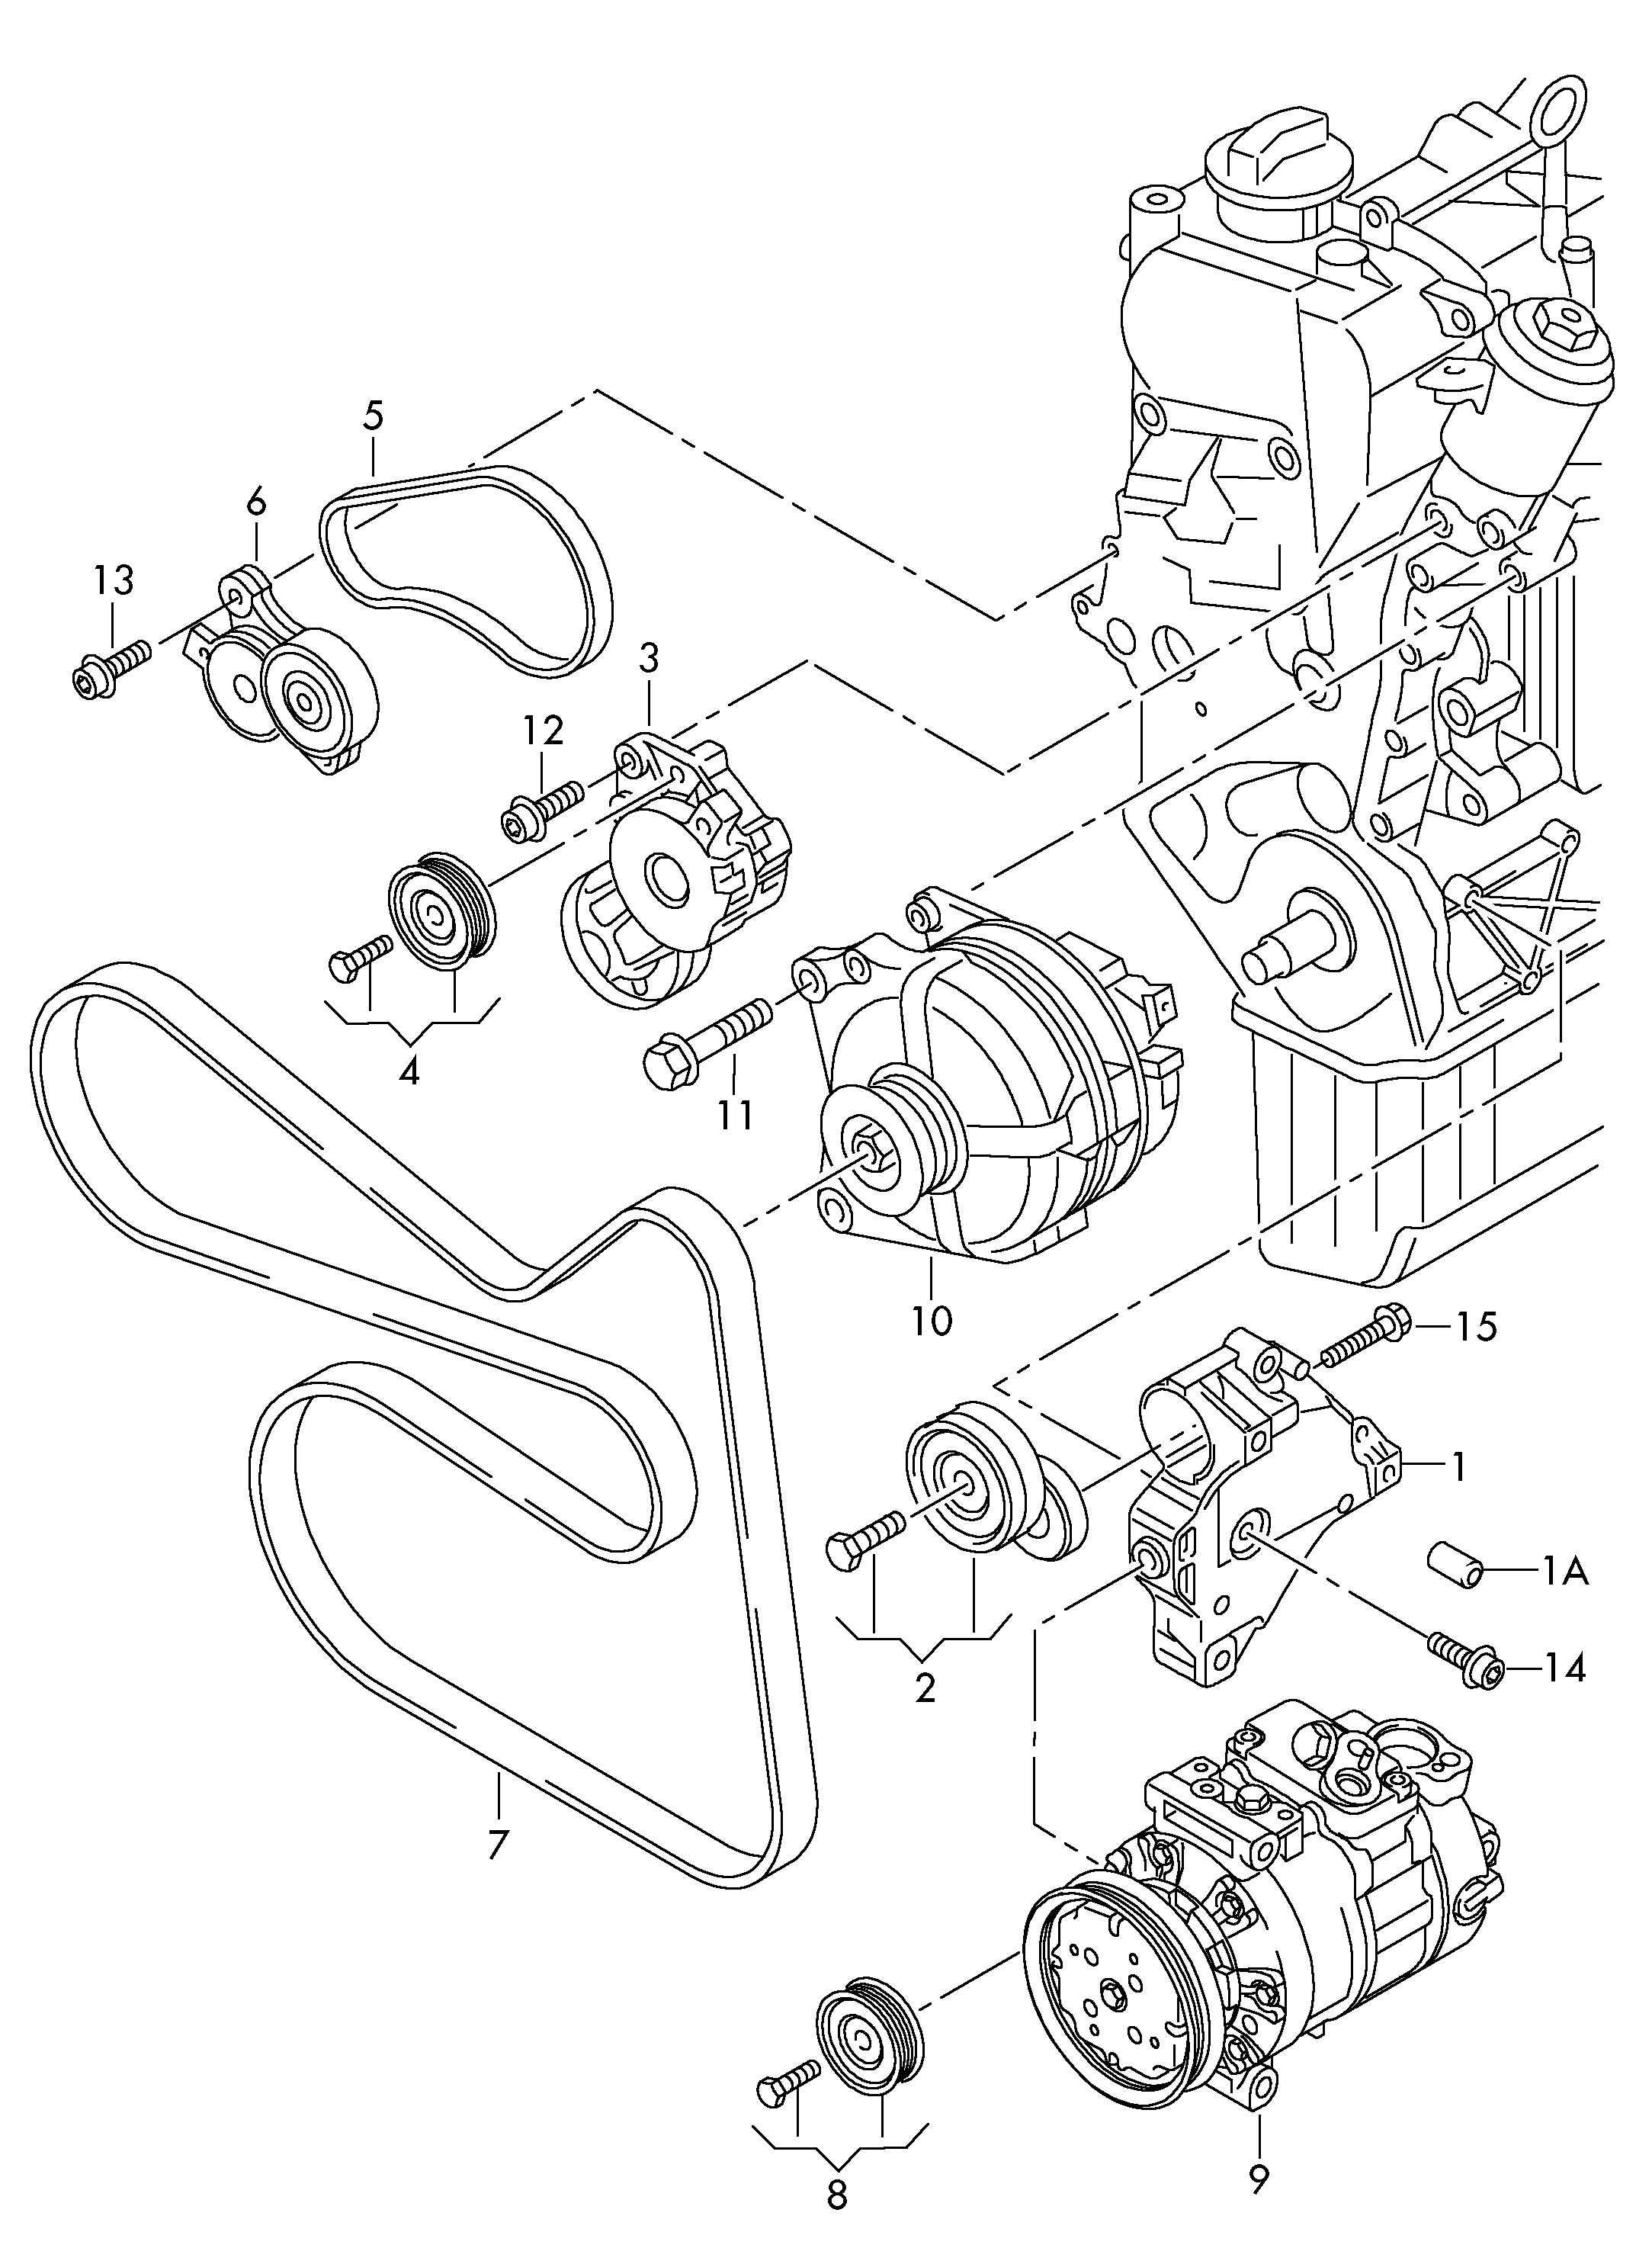 connecting and mounting parts
for alternator; pol... - Golf/Variant/4Motion(GOLF)  